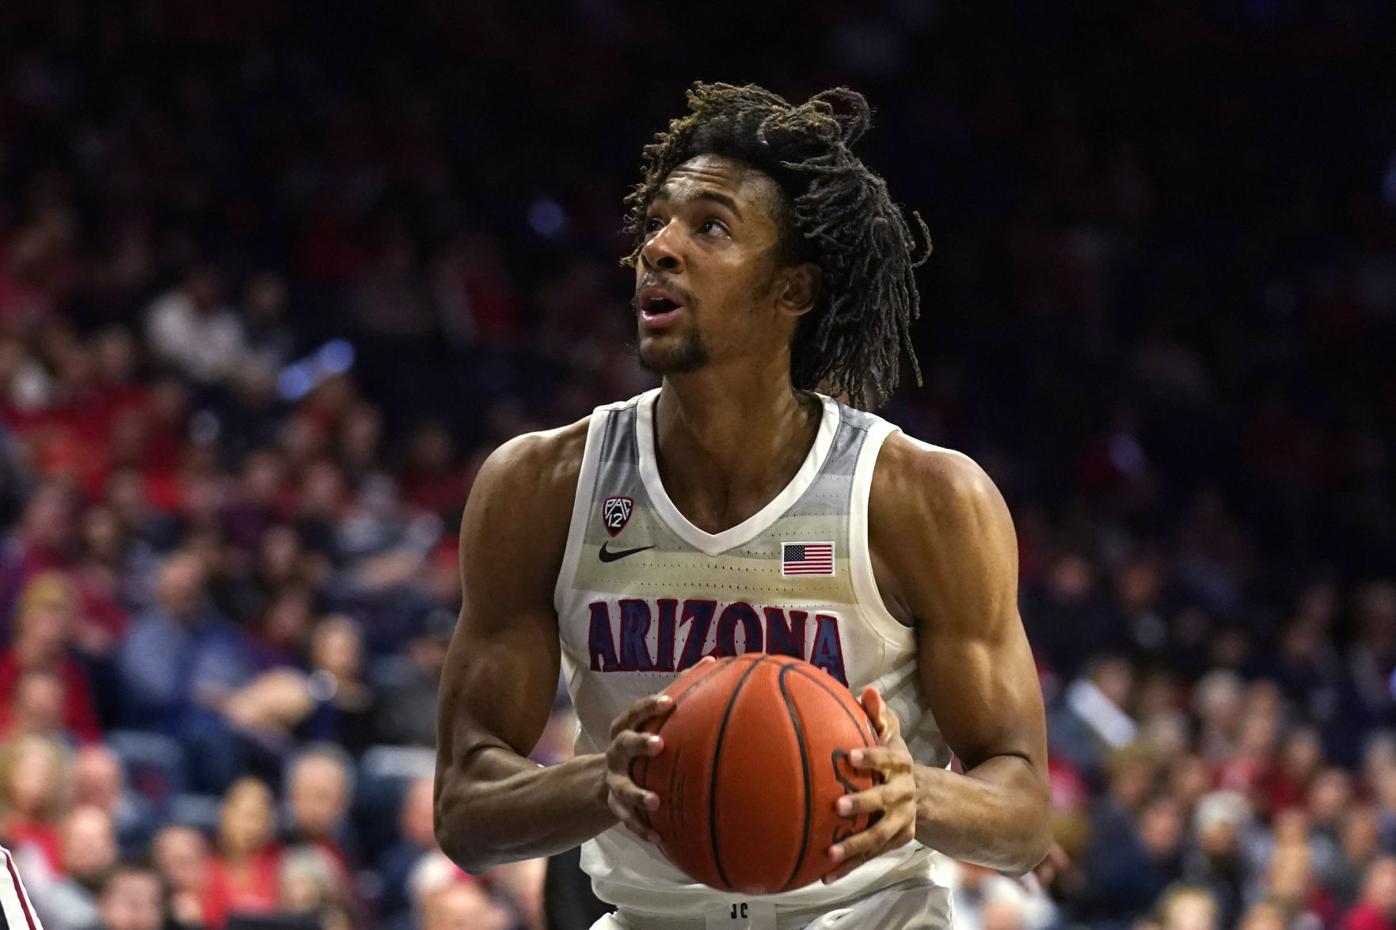 Wolves select Edwards with No. 1 pick in delayed NBA draft